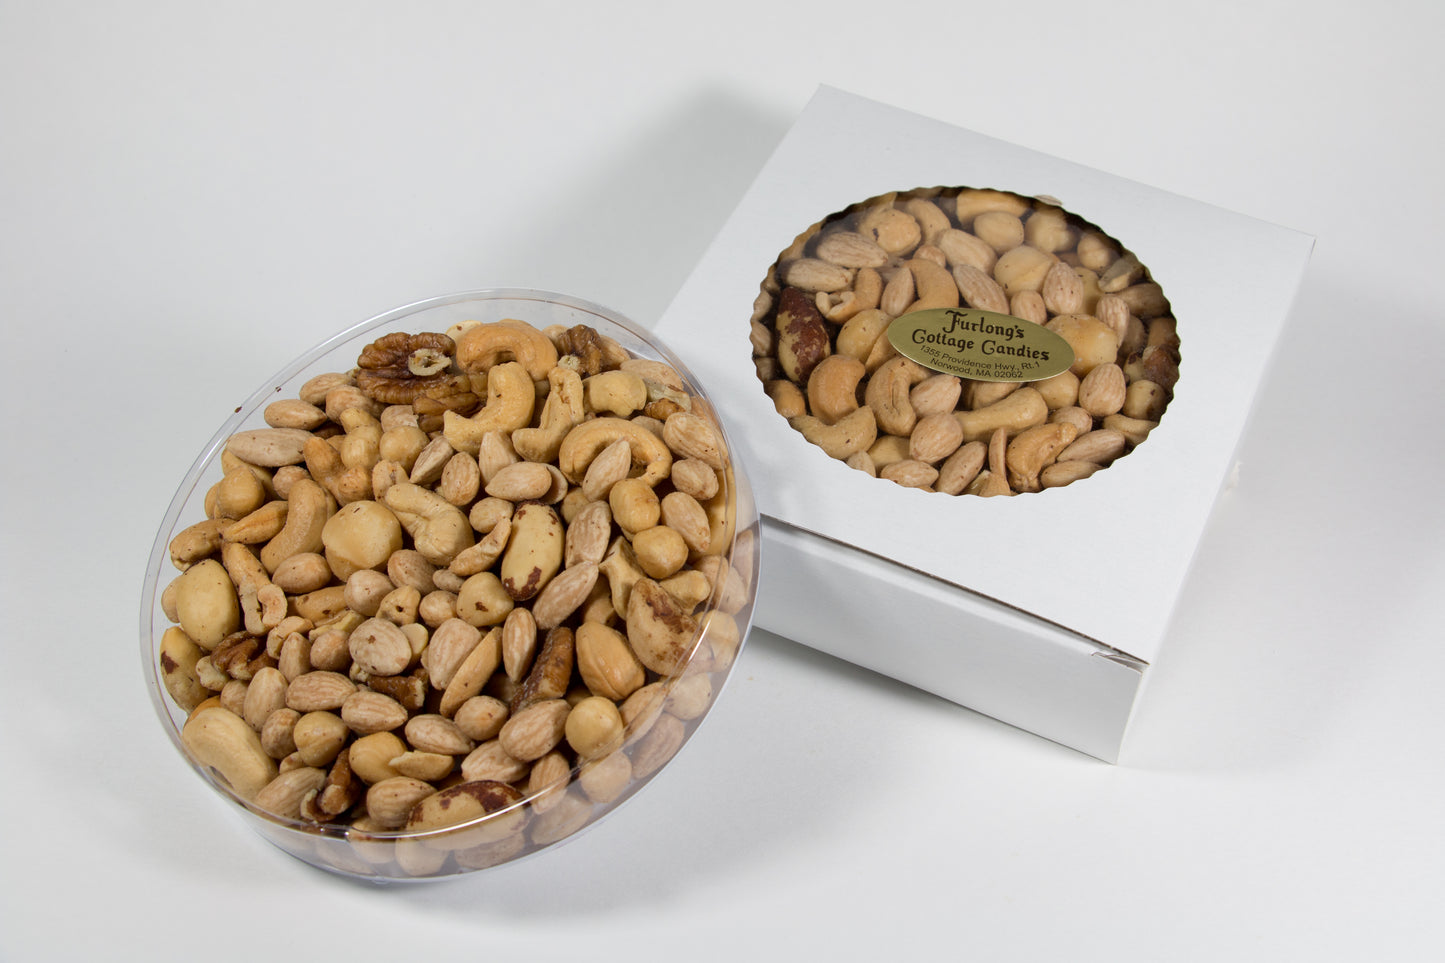 Superior Mixed Nuts - Salted